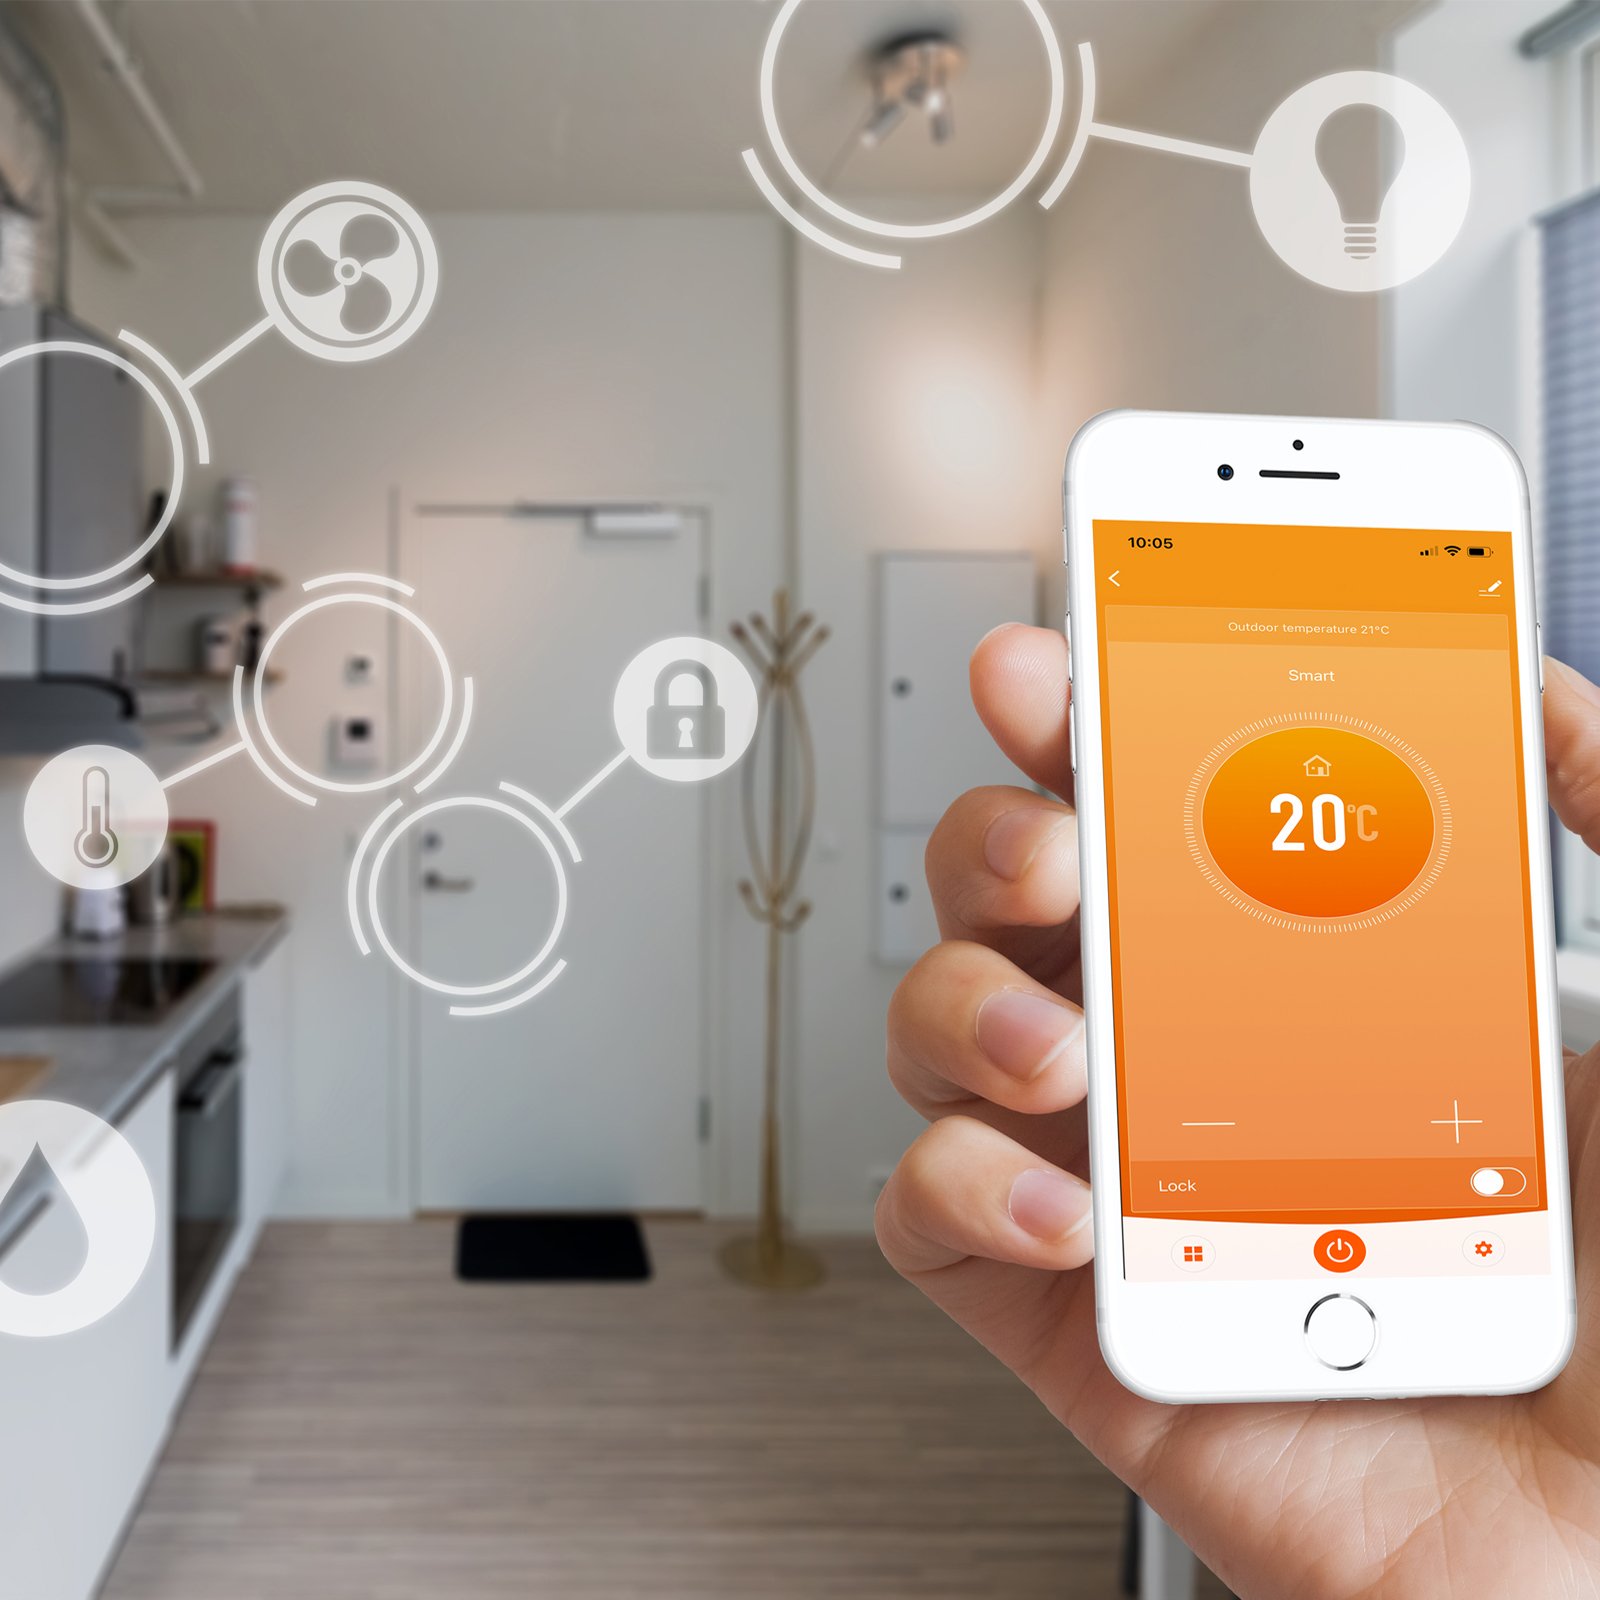 With Tuya Smart you control the different Smart Home components